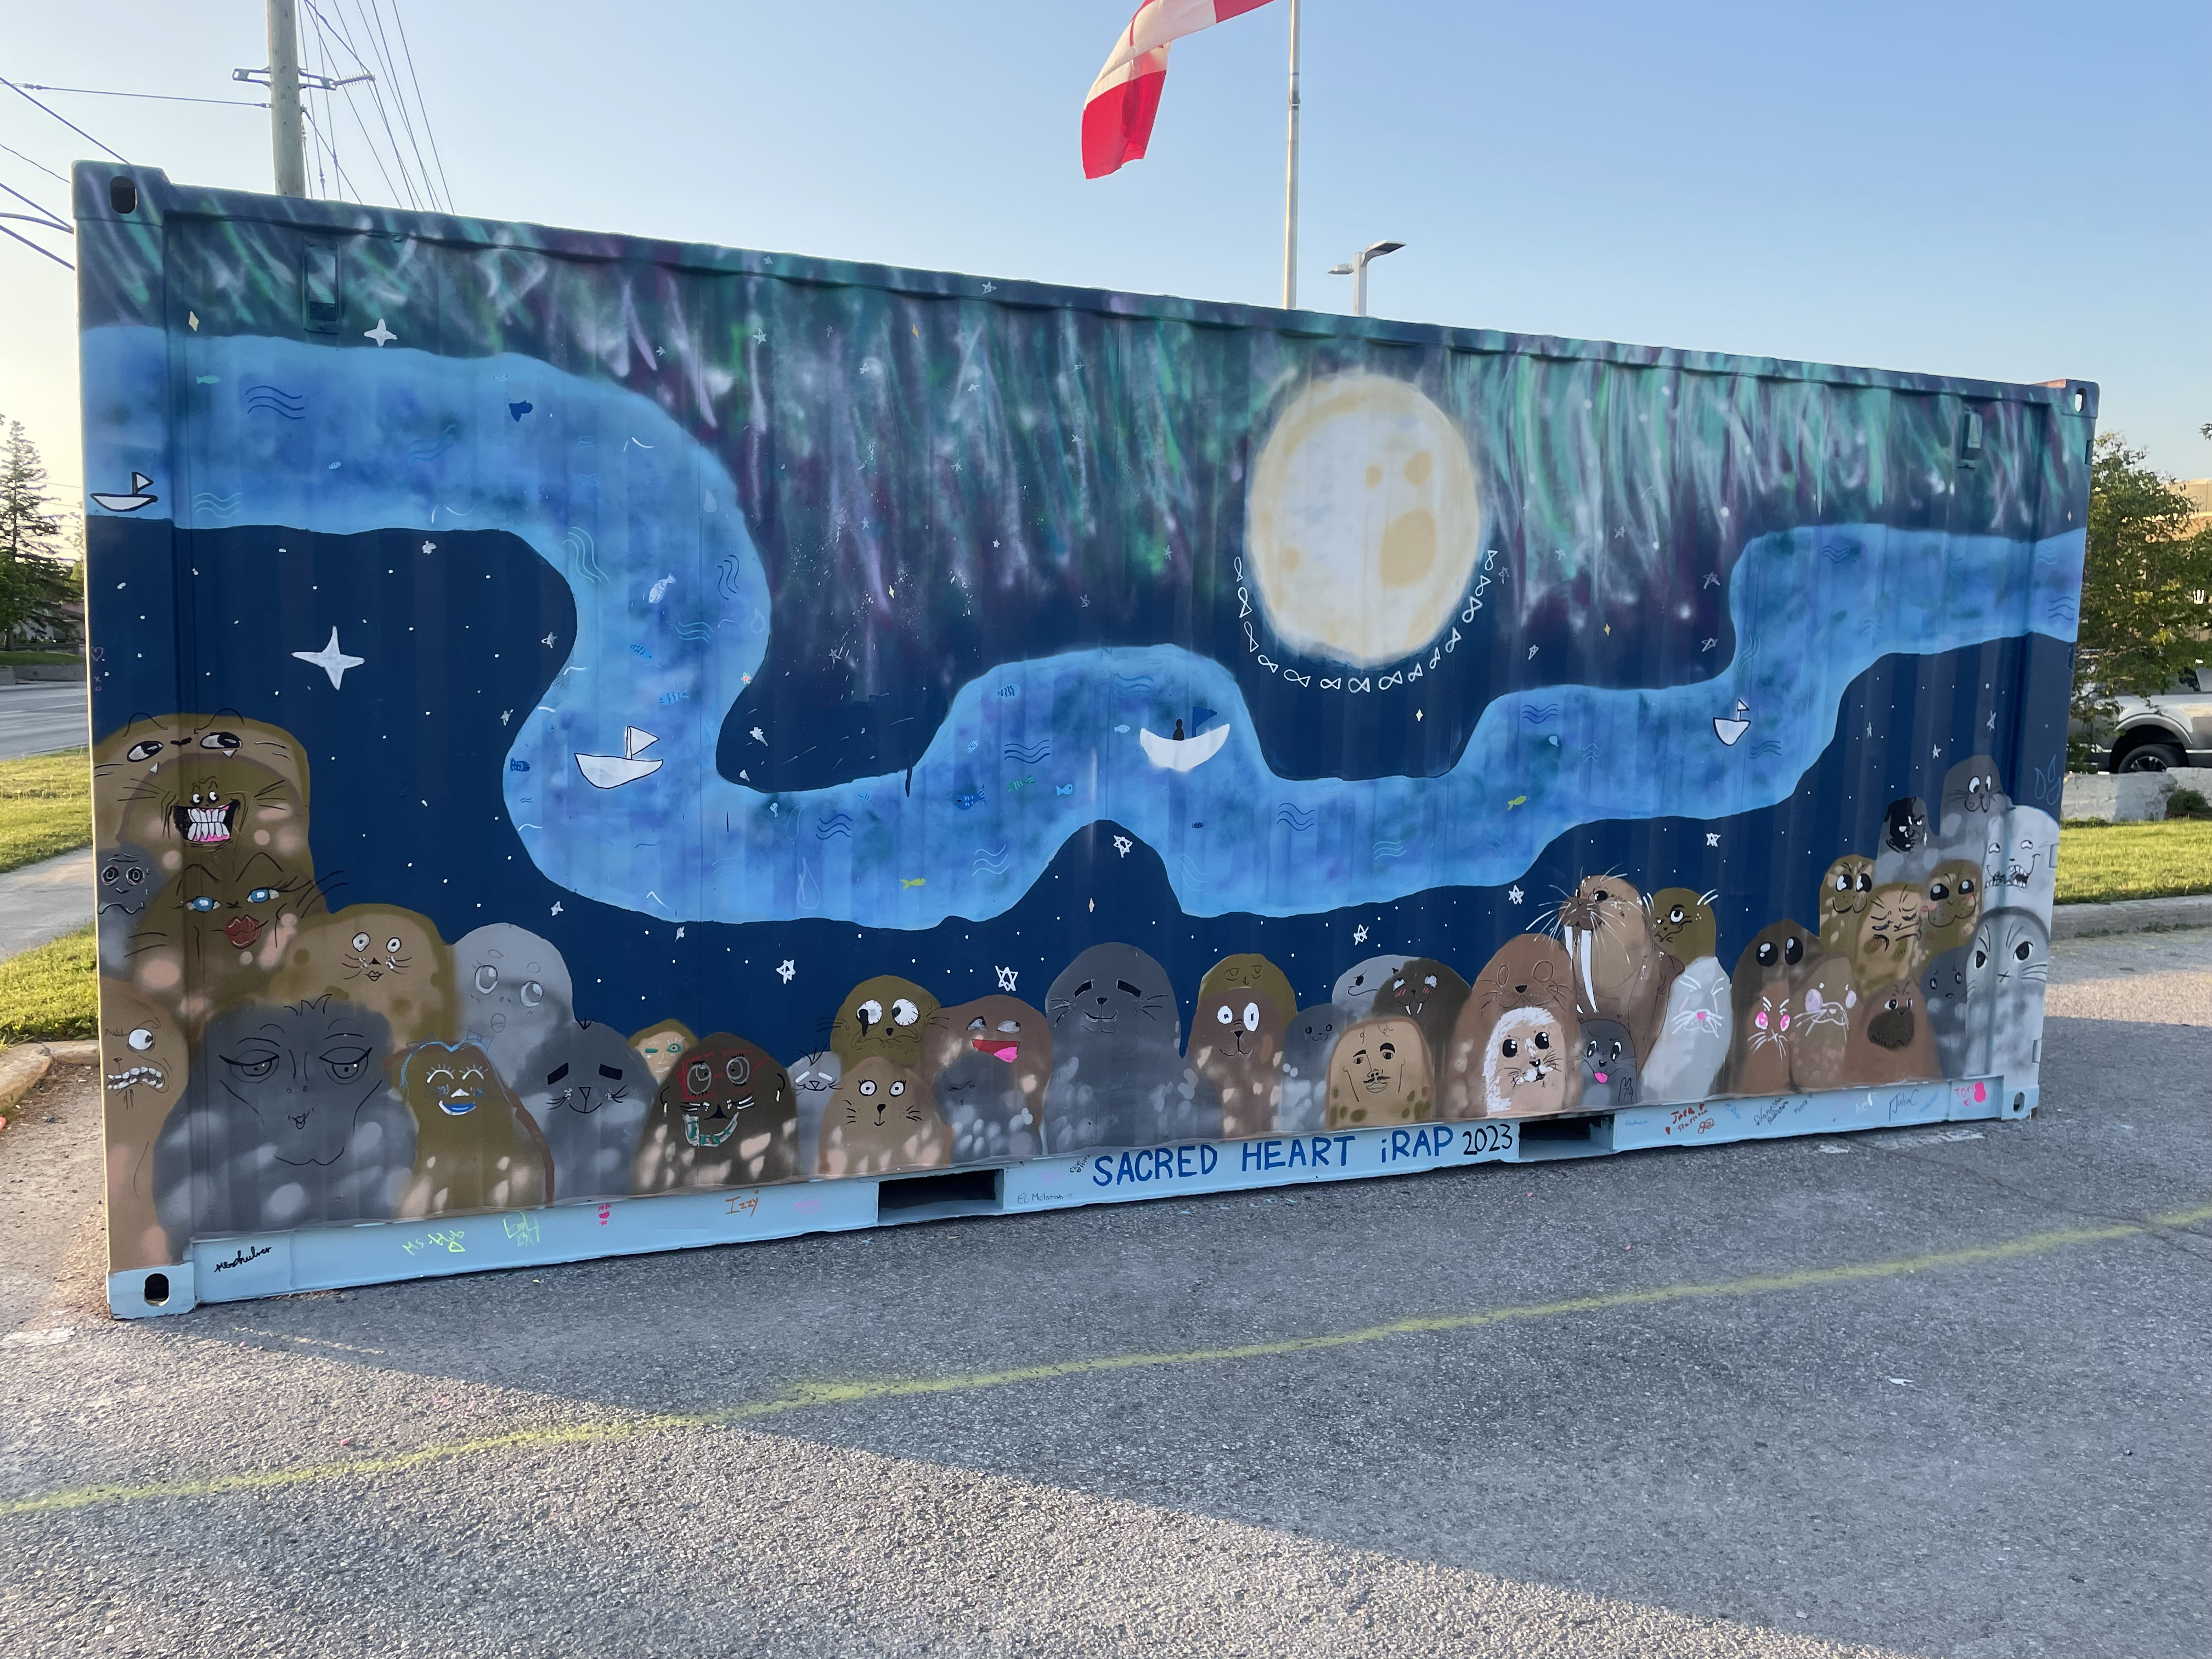 Local Catholic high school students painted a mural on the container filled with 16,000 pounds of food for Sanirajak.